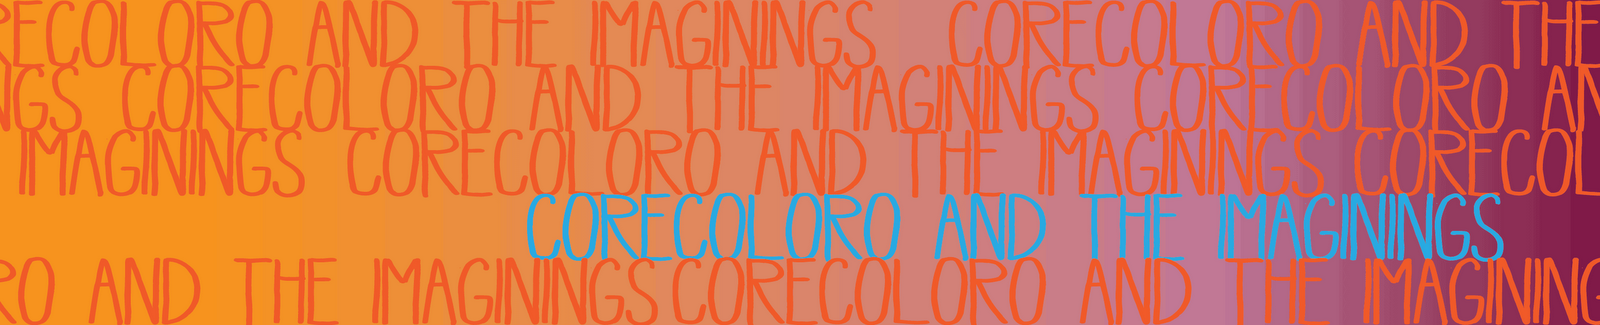 corecoloroo and the imaginings